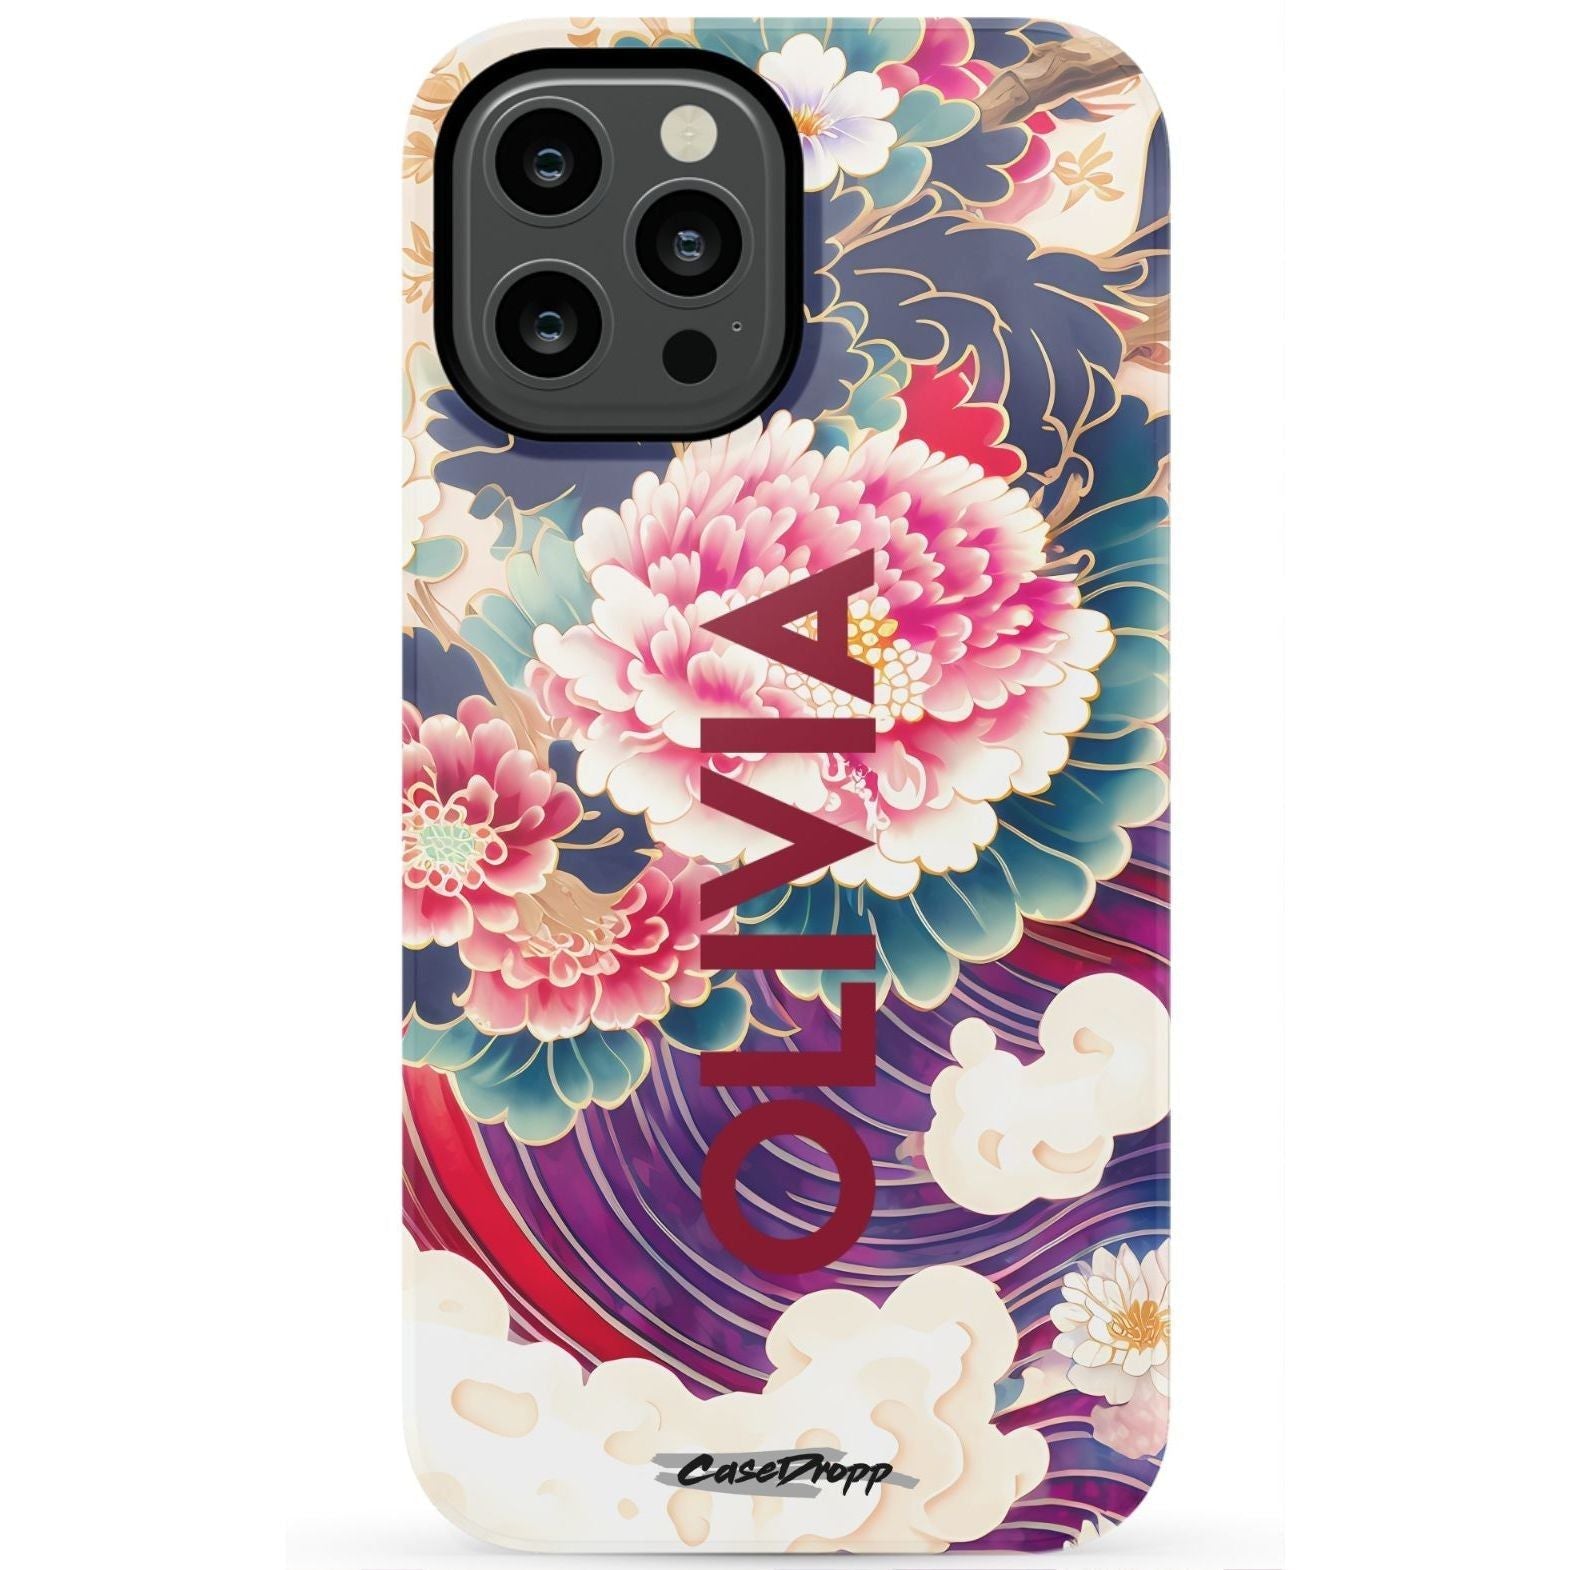 Drifting in Dreams - Custom Personalized - iPhone Case CaseDropp